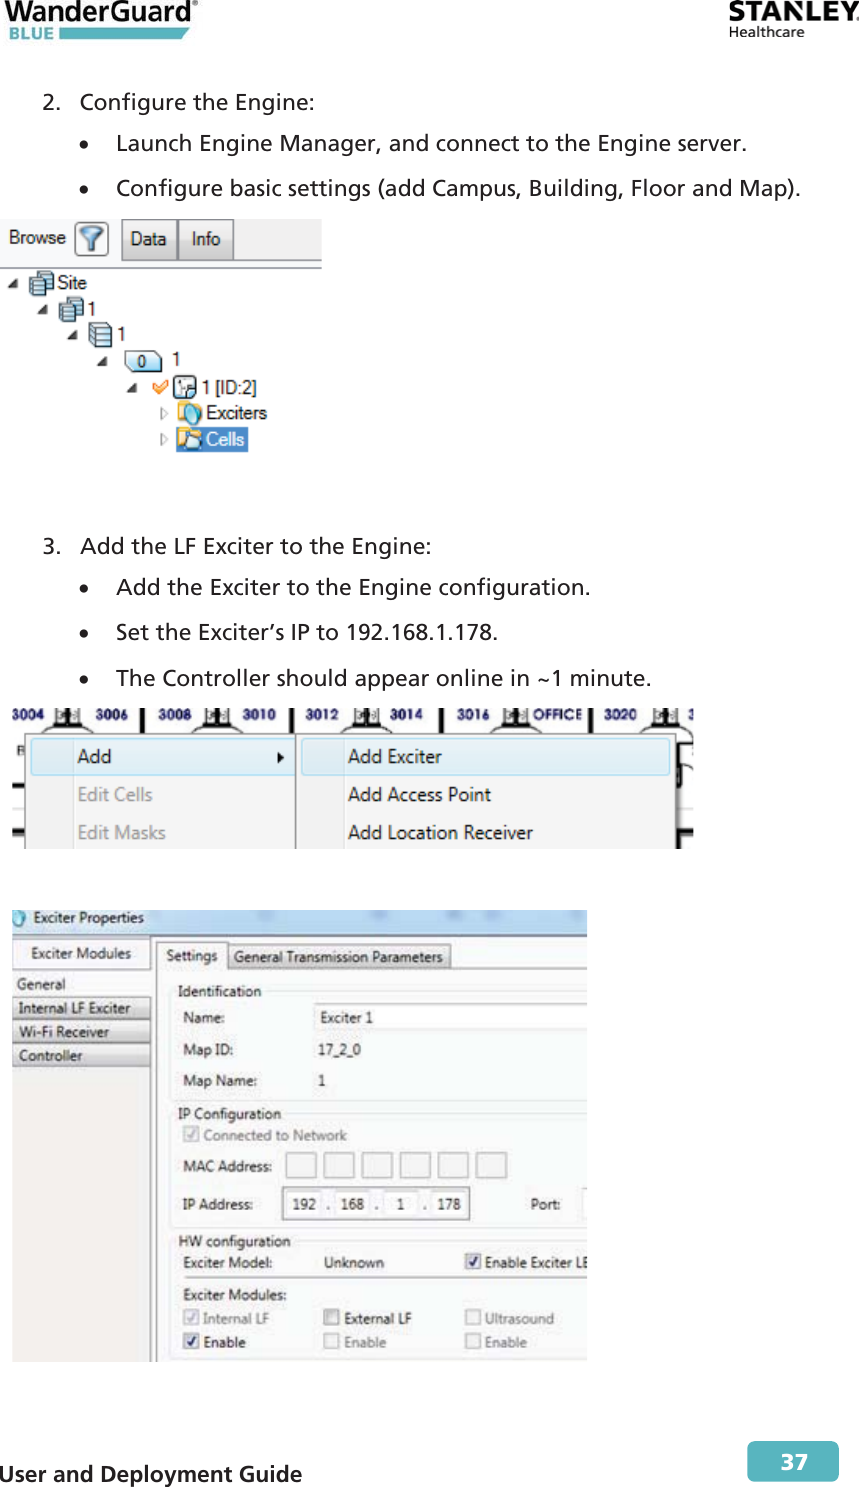  User and Deployment Guide        37 2. Configure the Engine: x Launch Engine Manager, and connect to the Engine server. x Configure basic settings (add Campus, Building, Floor and Map).  3. Add the LF Exciter to the Engine: x Add the Exciter to the Engine configuration. x Set the Exciter’s IP to 192.168.1.178. x The Controller should appear online in ~1 minute.    